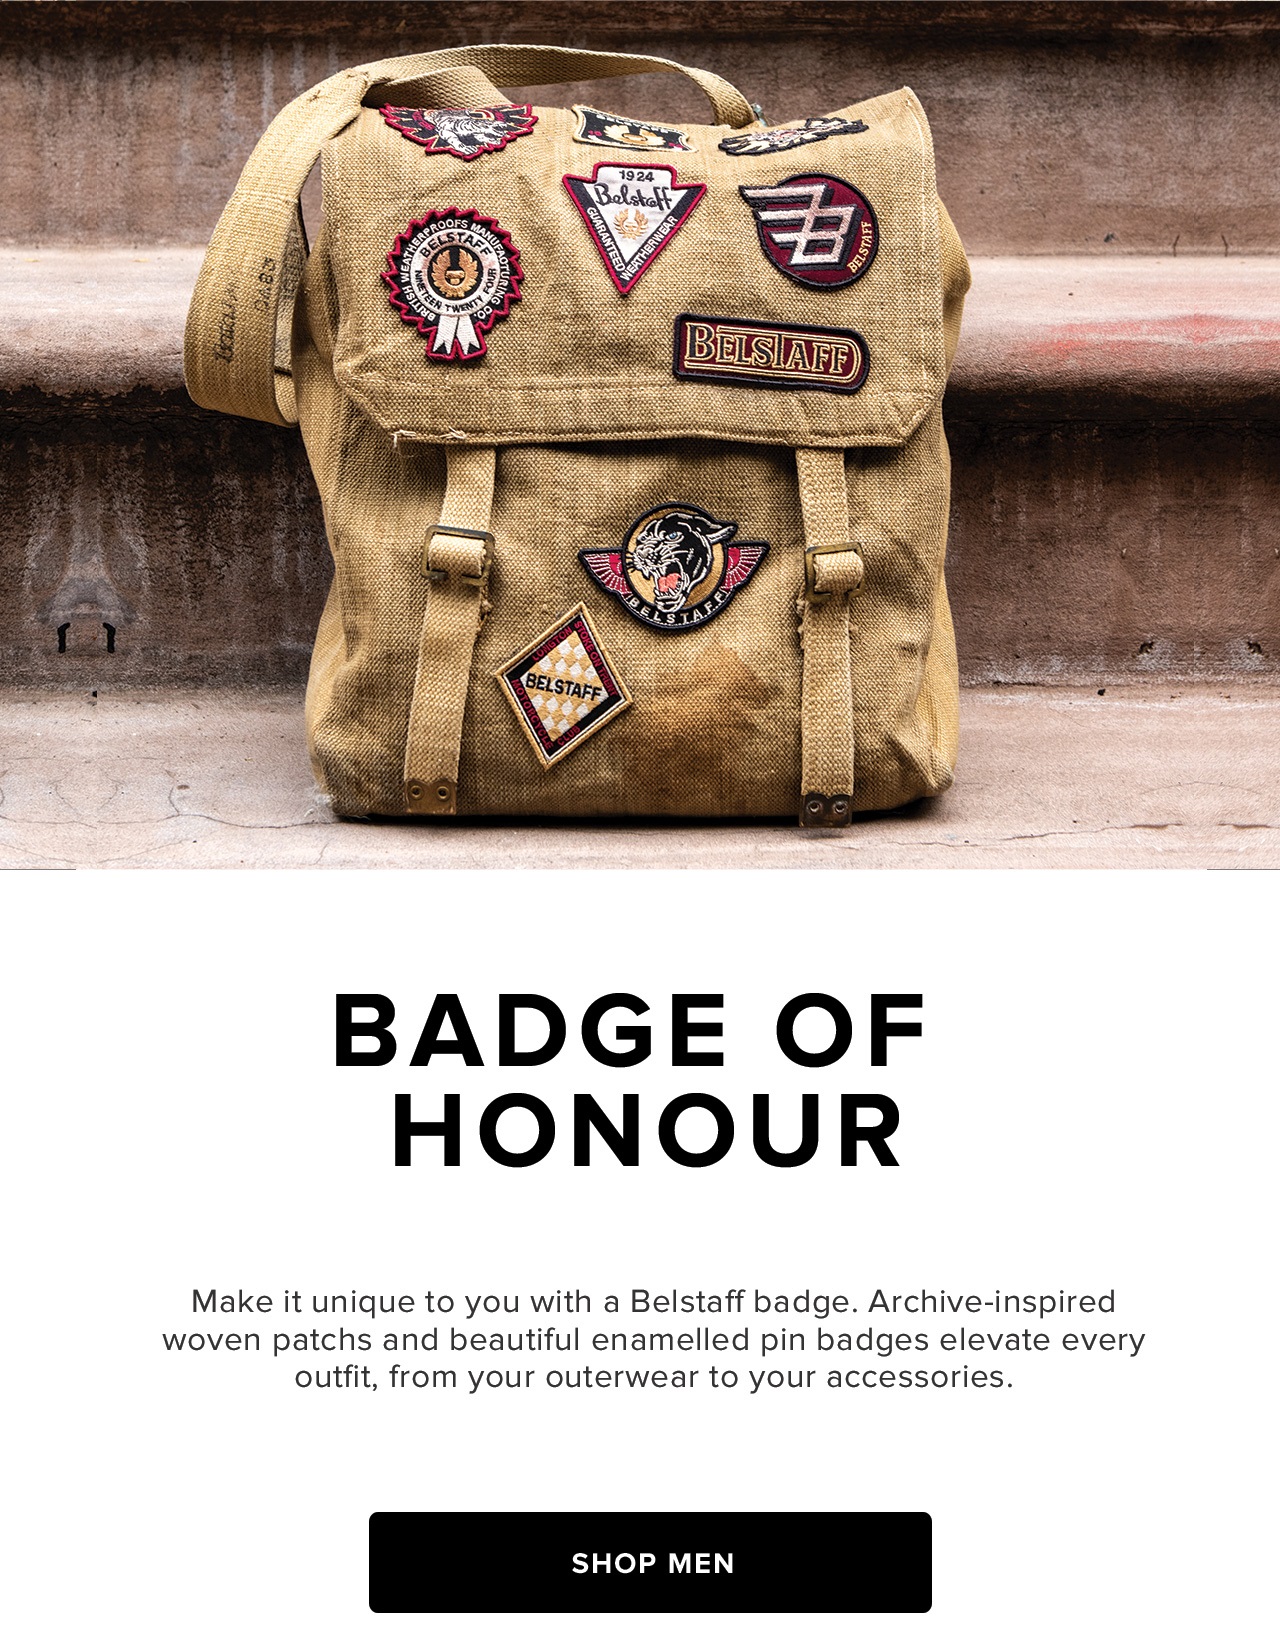 Make it unique to you with a Belstaff badge. Archive-inspired woven patchs and beautiful enamelled pin badges elevate every outfit, from your outerwear to your accessories. Shop Men.